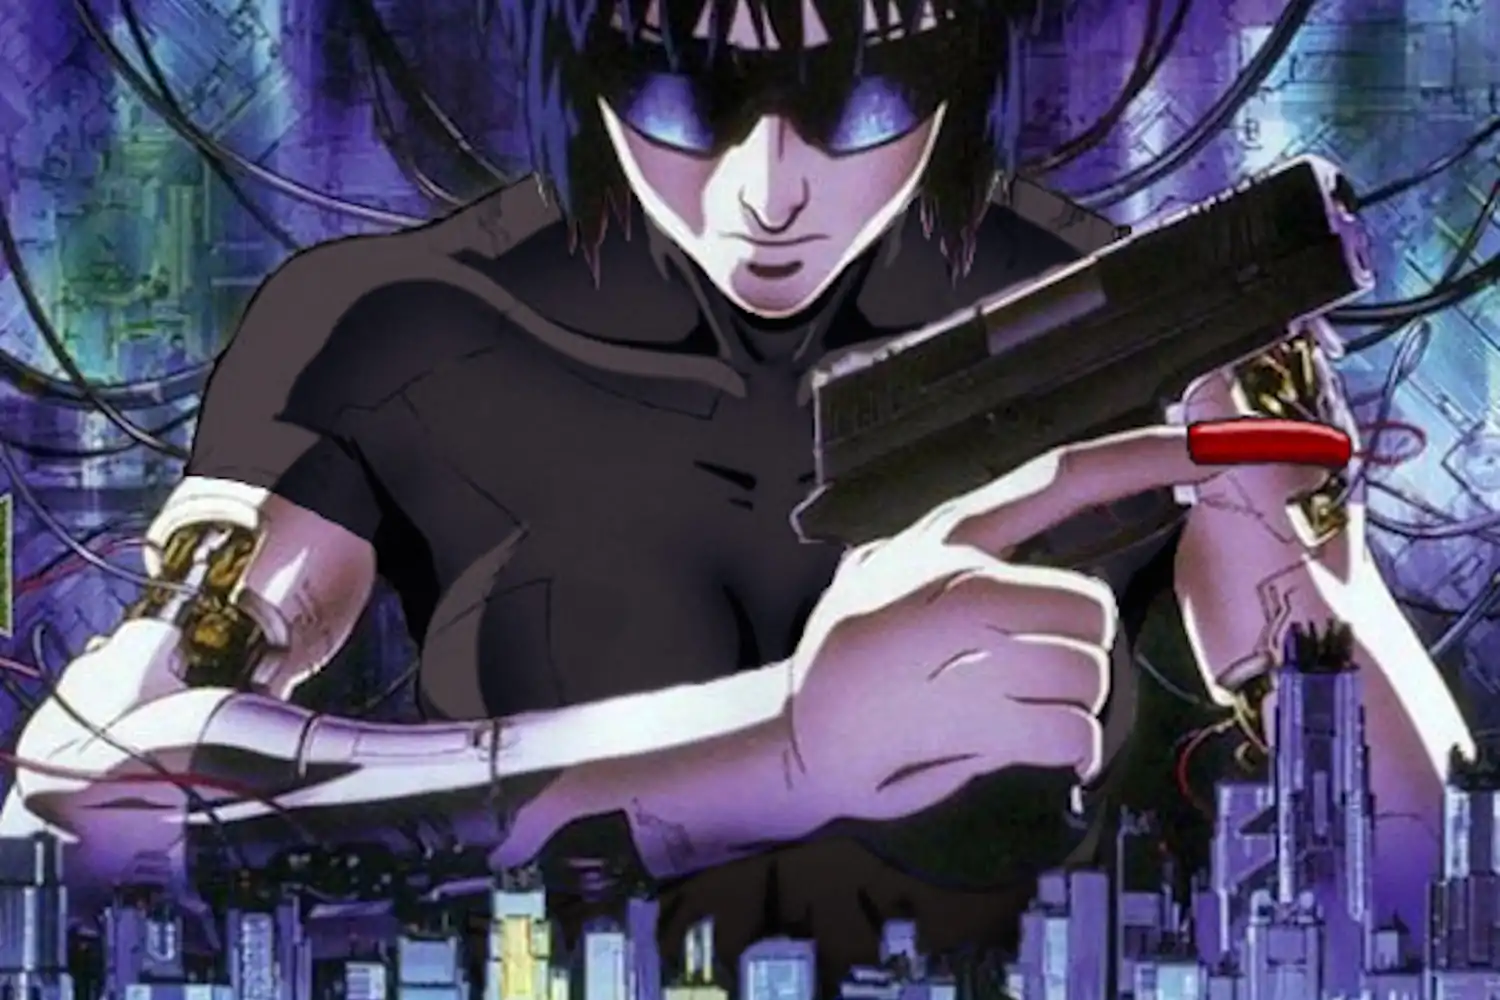 Major Motoko Kusanagi in a Promotional poster for the original Ghost in the Shell movie released in 1995